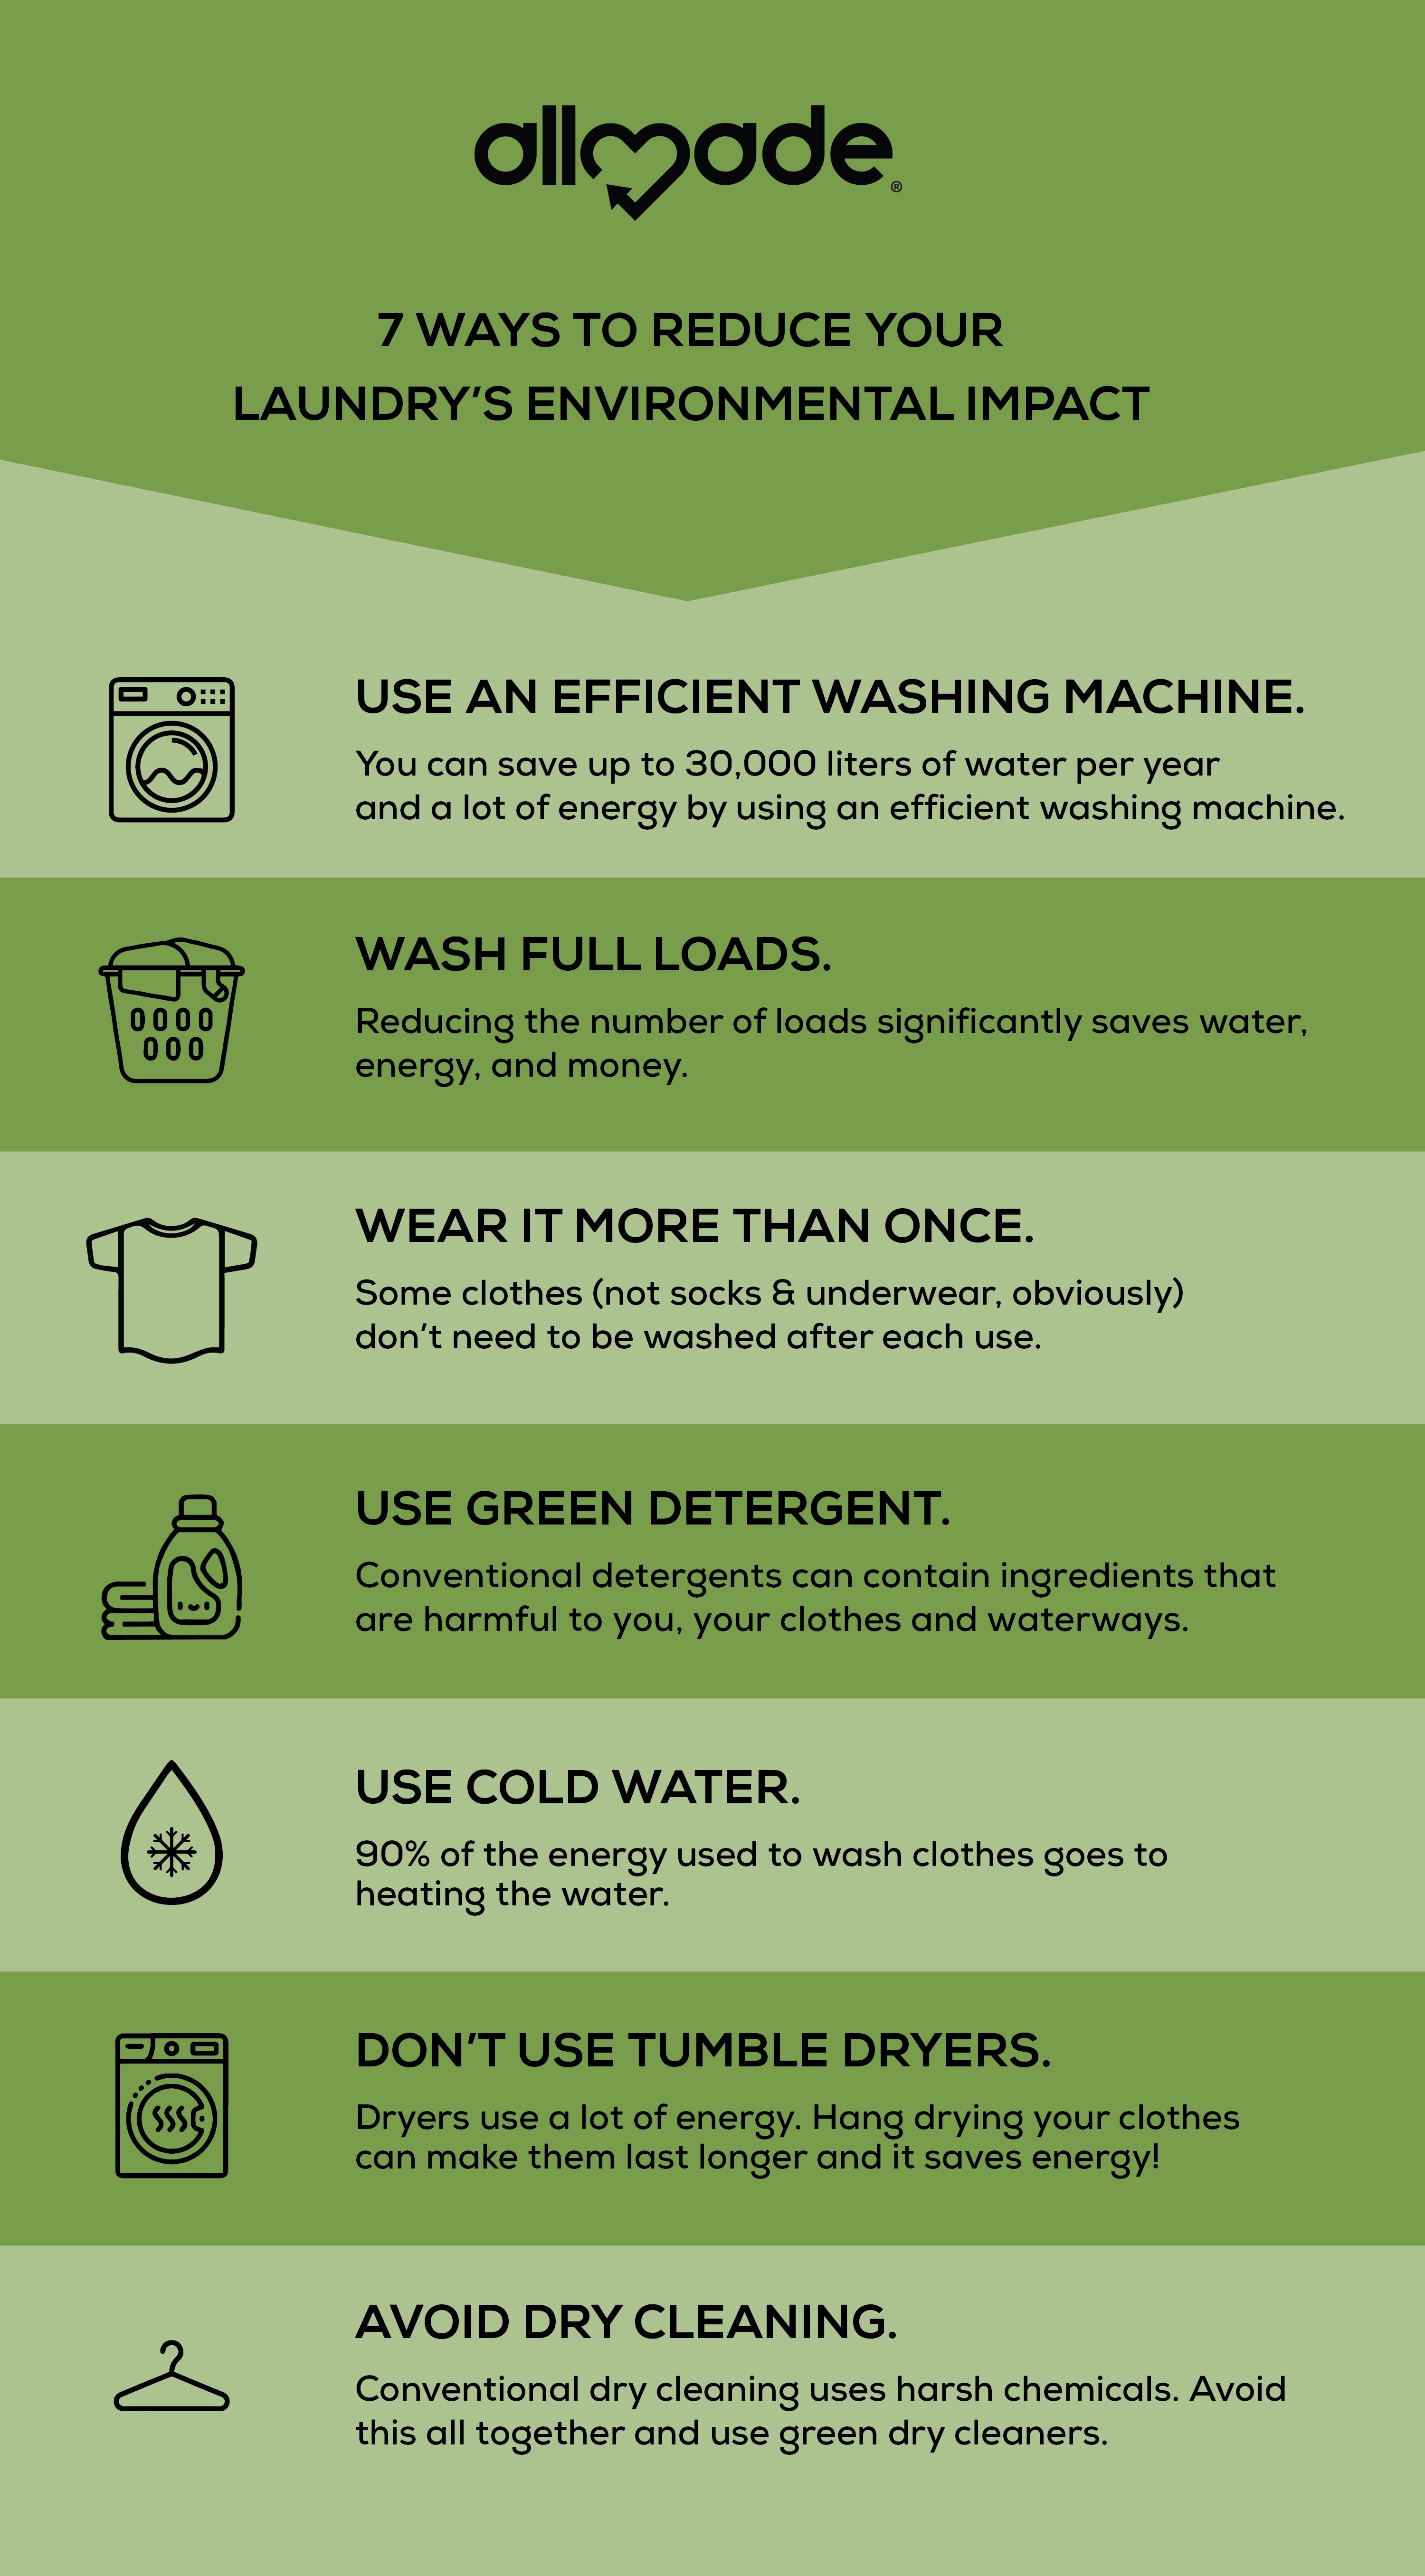 7 WAYS TO REDUCE YOUR LAUNDRY’S ENVIRONMENTAL IMPACT   1. USE AN EFFICIENT WASHING MACHINE.  You can save up to 30,000 liters of water per year and a lot of   energy by using an efficient washing machine.     2. WASH FULL LOADS. Reducing the number of loads significantly saves water, energy, and money.     3. WEAR IT MORE THAN ONCE. Some clothes (not socks & underwear, obviously) don’t need to be washed after each use.    4. USE GREEN DETERGENT. Conventional detergents can contain ingredients that are harmful to you, your clothes and waterways.    5. USE COLD WATER. 90% of the energy used to wash clothes goes to heating the water.    6. DON’T USE TUMBLE DRYERS. Dryers use a lot of energy. Hang drying your clothes can make them last longer and it saves energy!    7. AVOID DRY CLEANING. Conventional dry cleaning uses harsh chemicals. Avoid this all together and use green dry cleaners.    